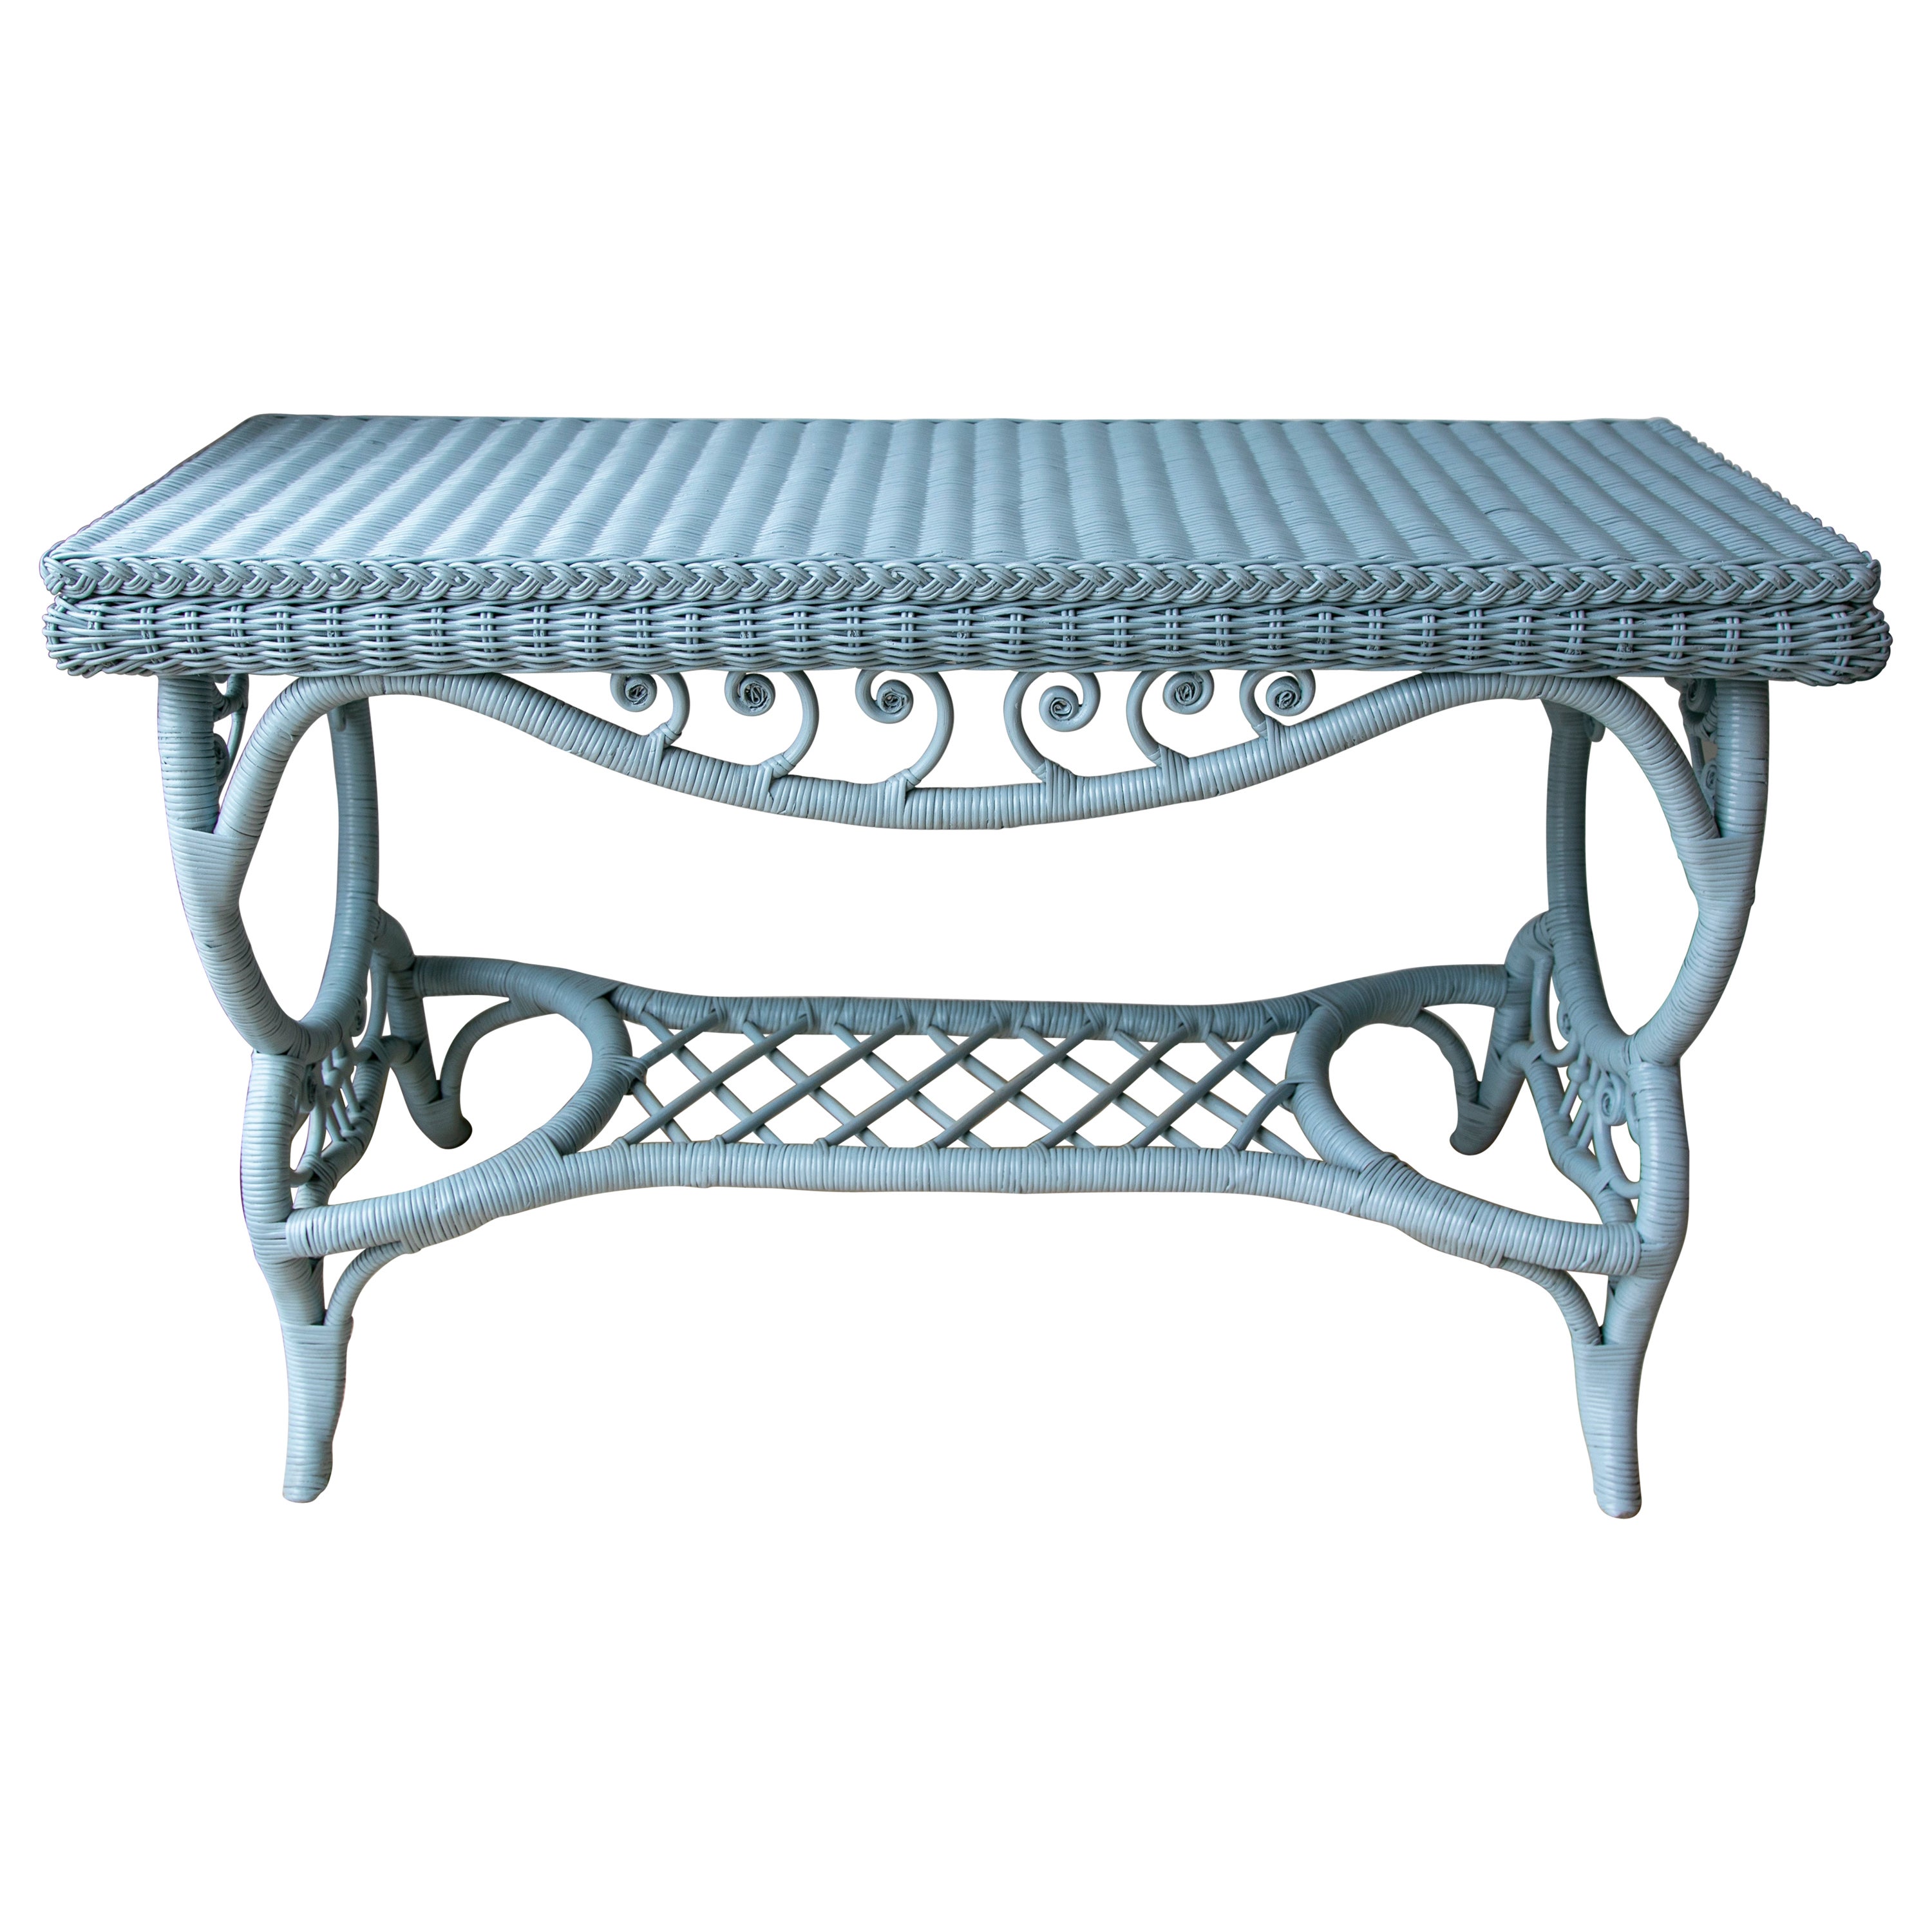 Spanish Handmade Wicker Console Lacquered in Blue Colour For Sale